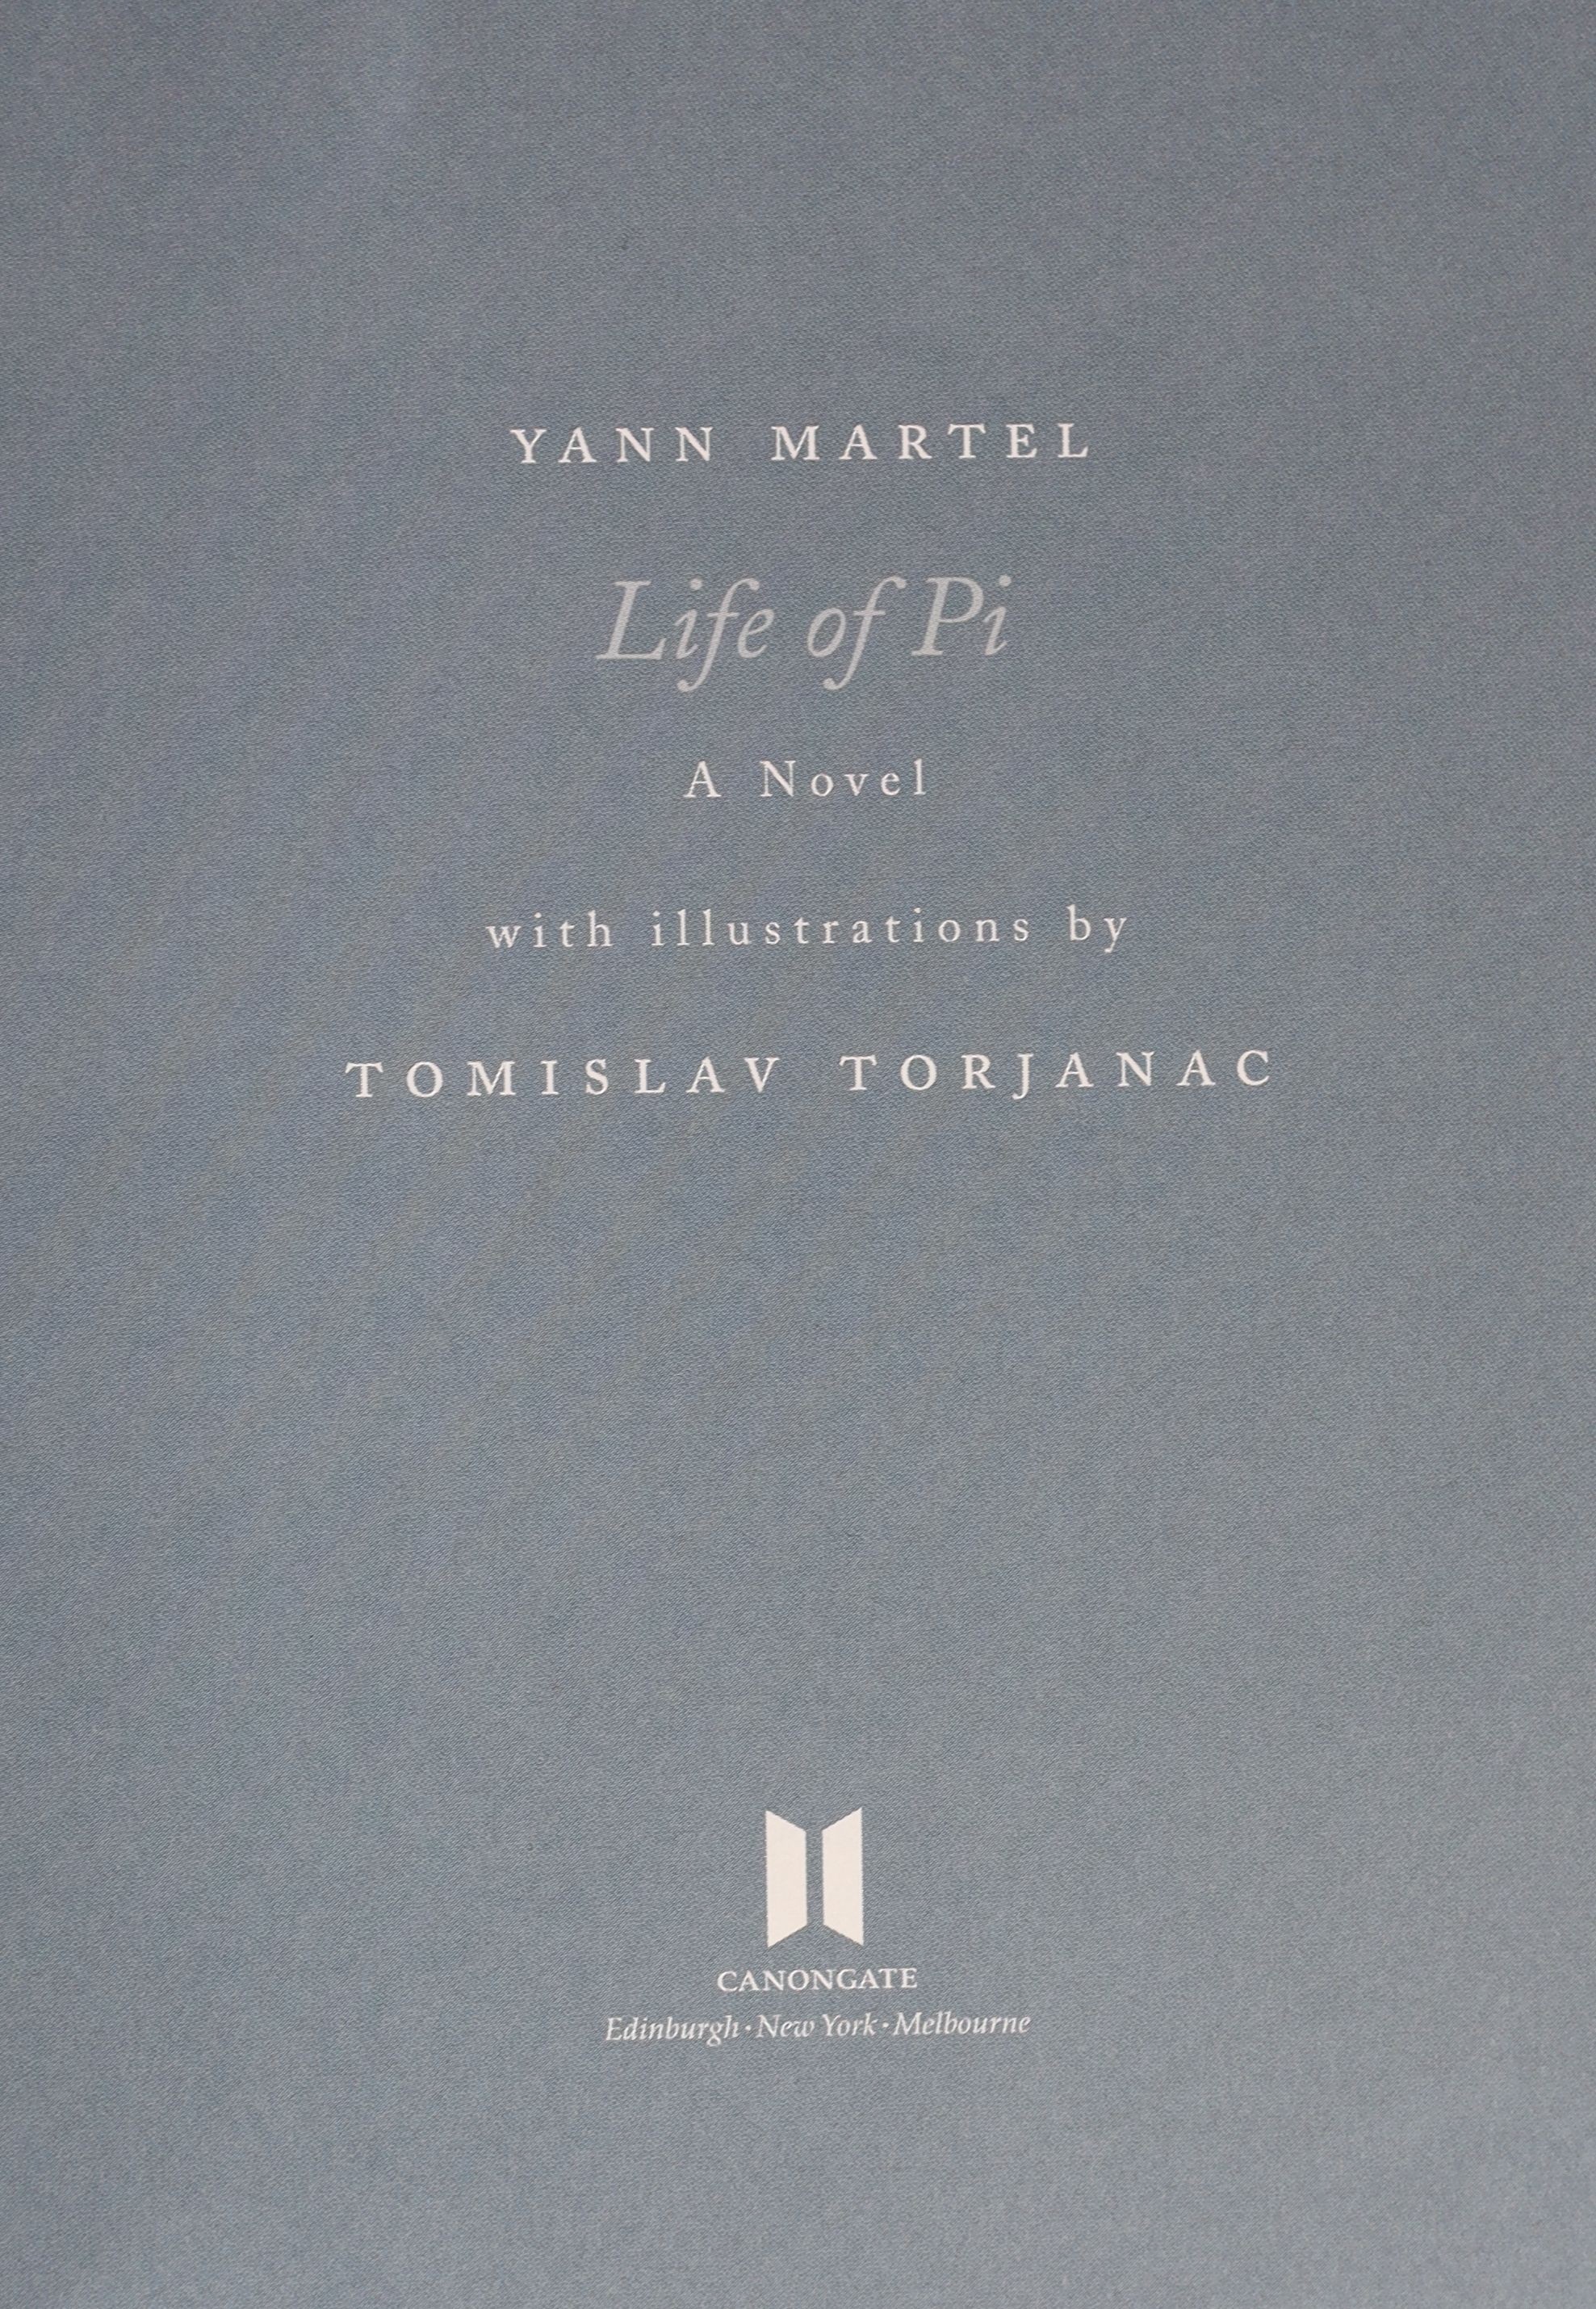 Martel, Yann - Life of Pi. 1st illustrated edition, limited edition, one of 3000. Signed by the author and illustrator on limitation page. Complete with numerous coloured illustrations. Publishers half cloth and pictoria